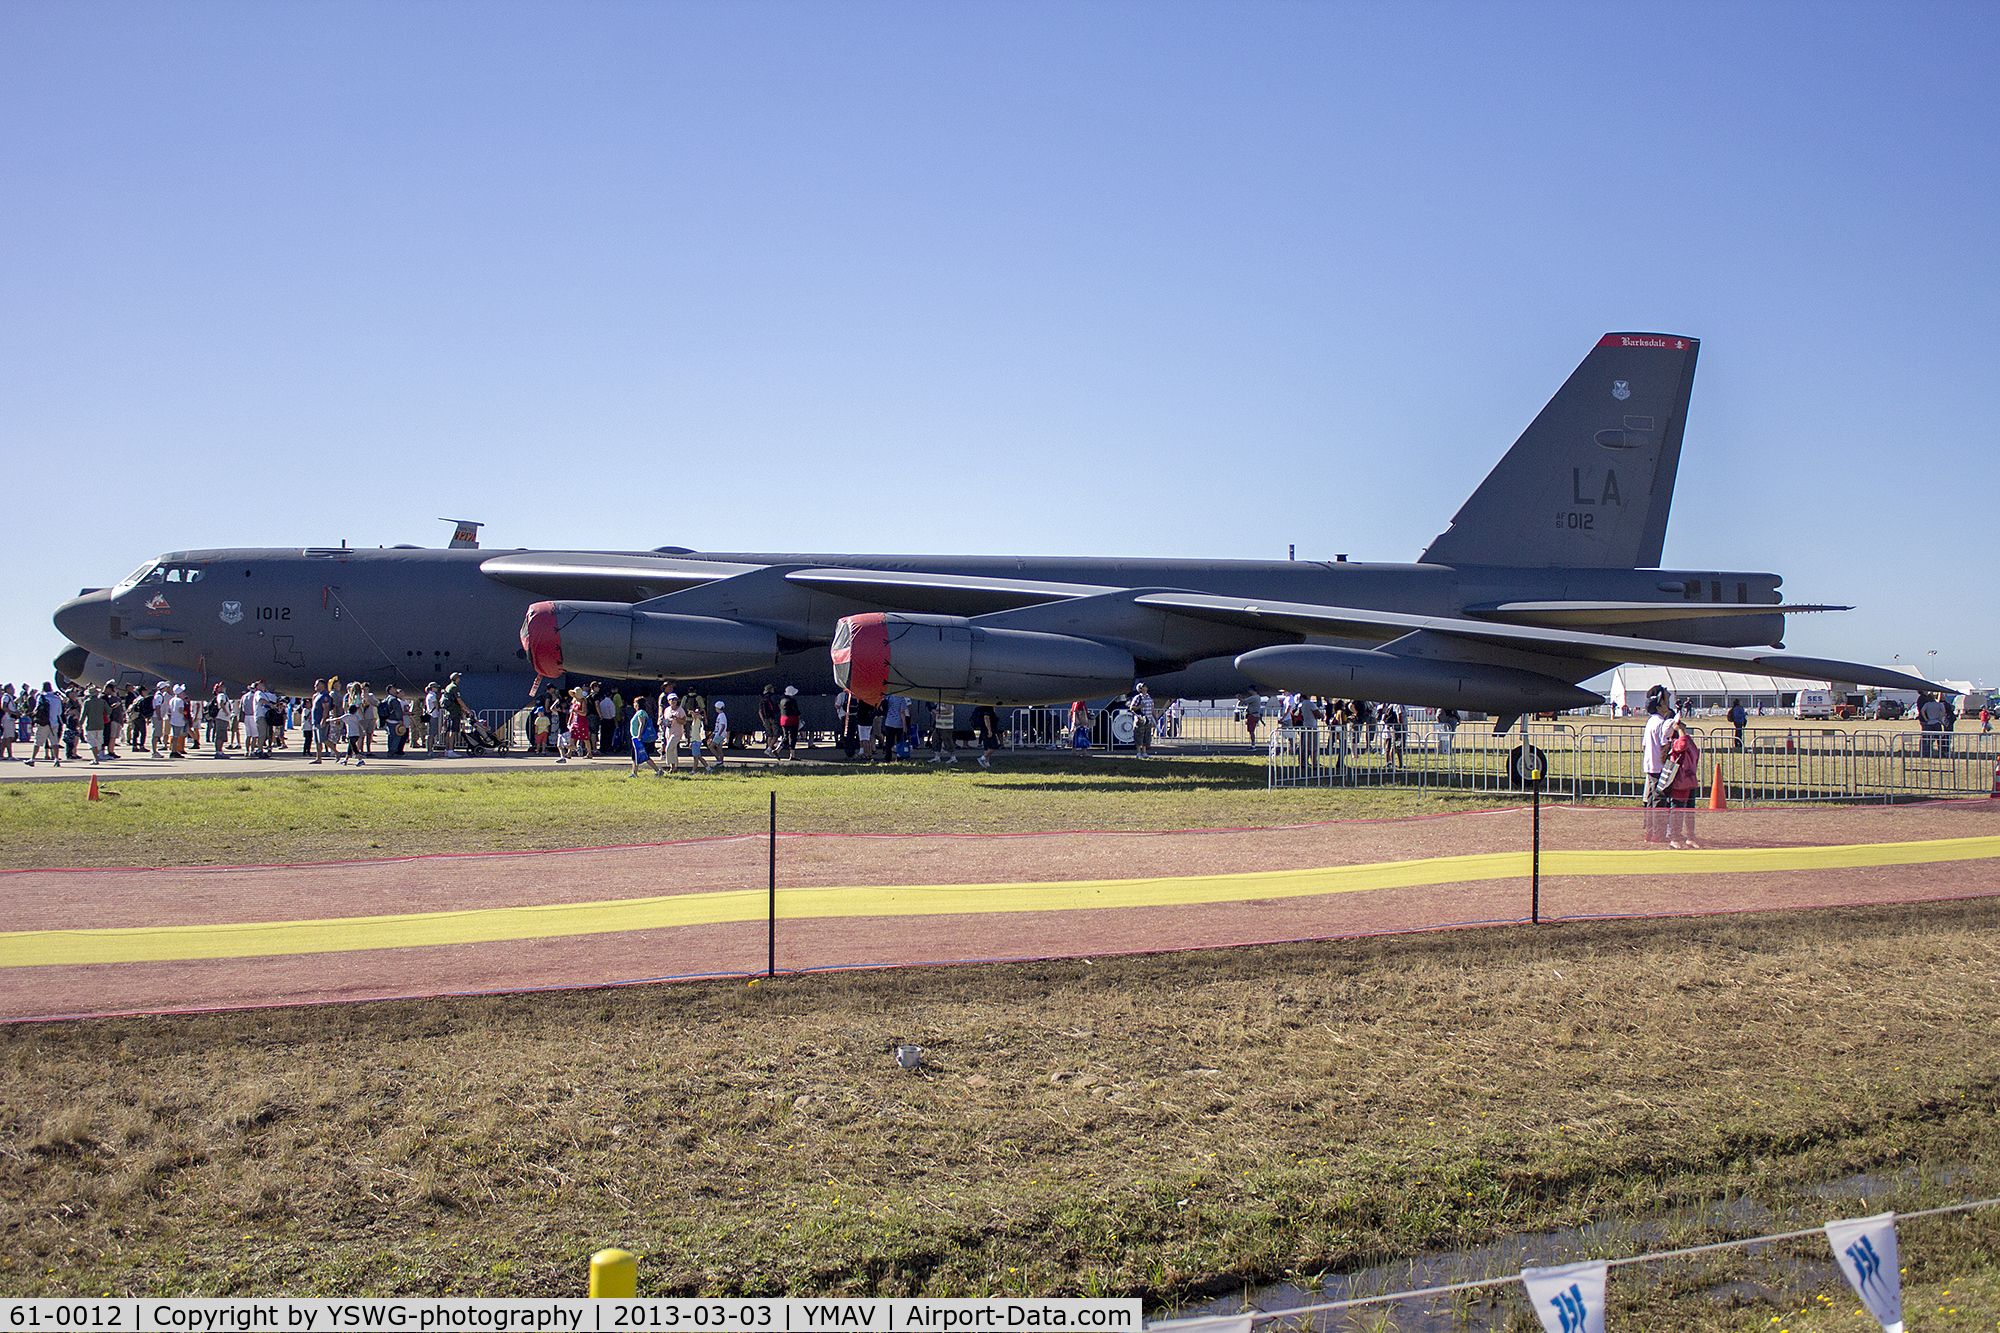 61-0012, 1961 Boeing B-52H Stratofortress C/N 464439, U.S. Air Force (61-0012) B-52H Stratofortress on display at the 2013 Avalon Airshow.